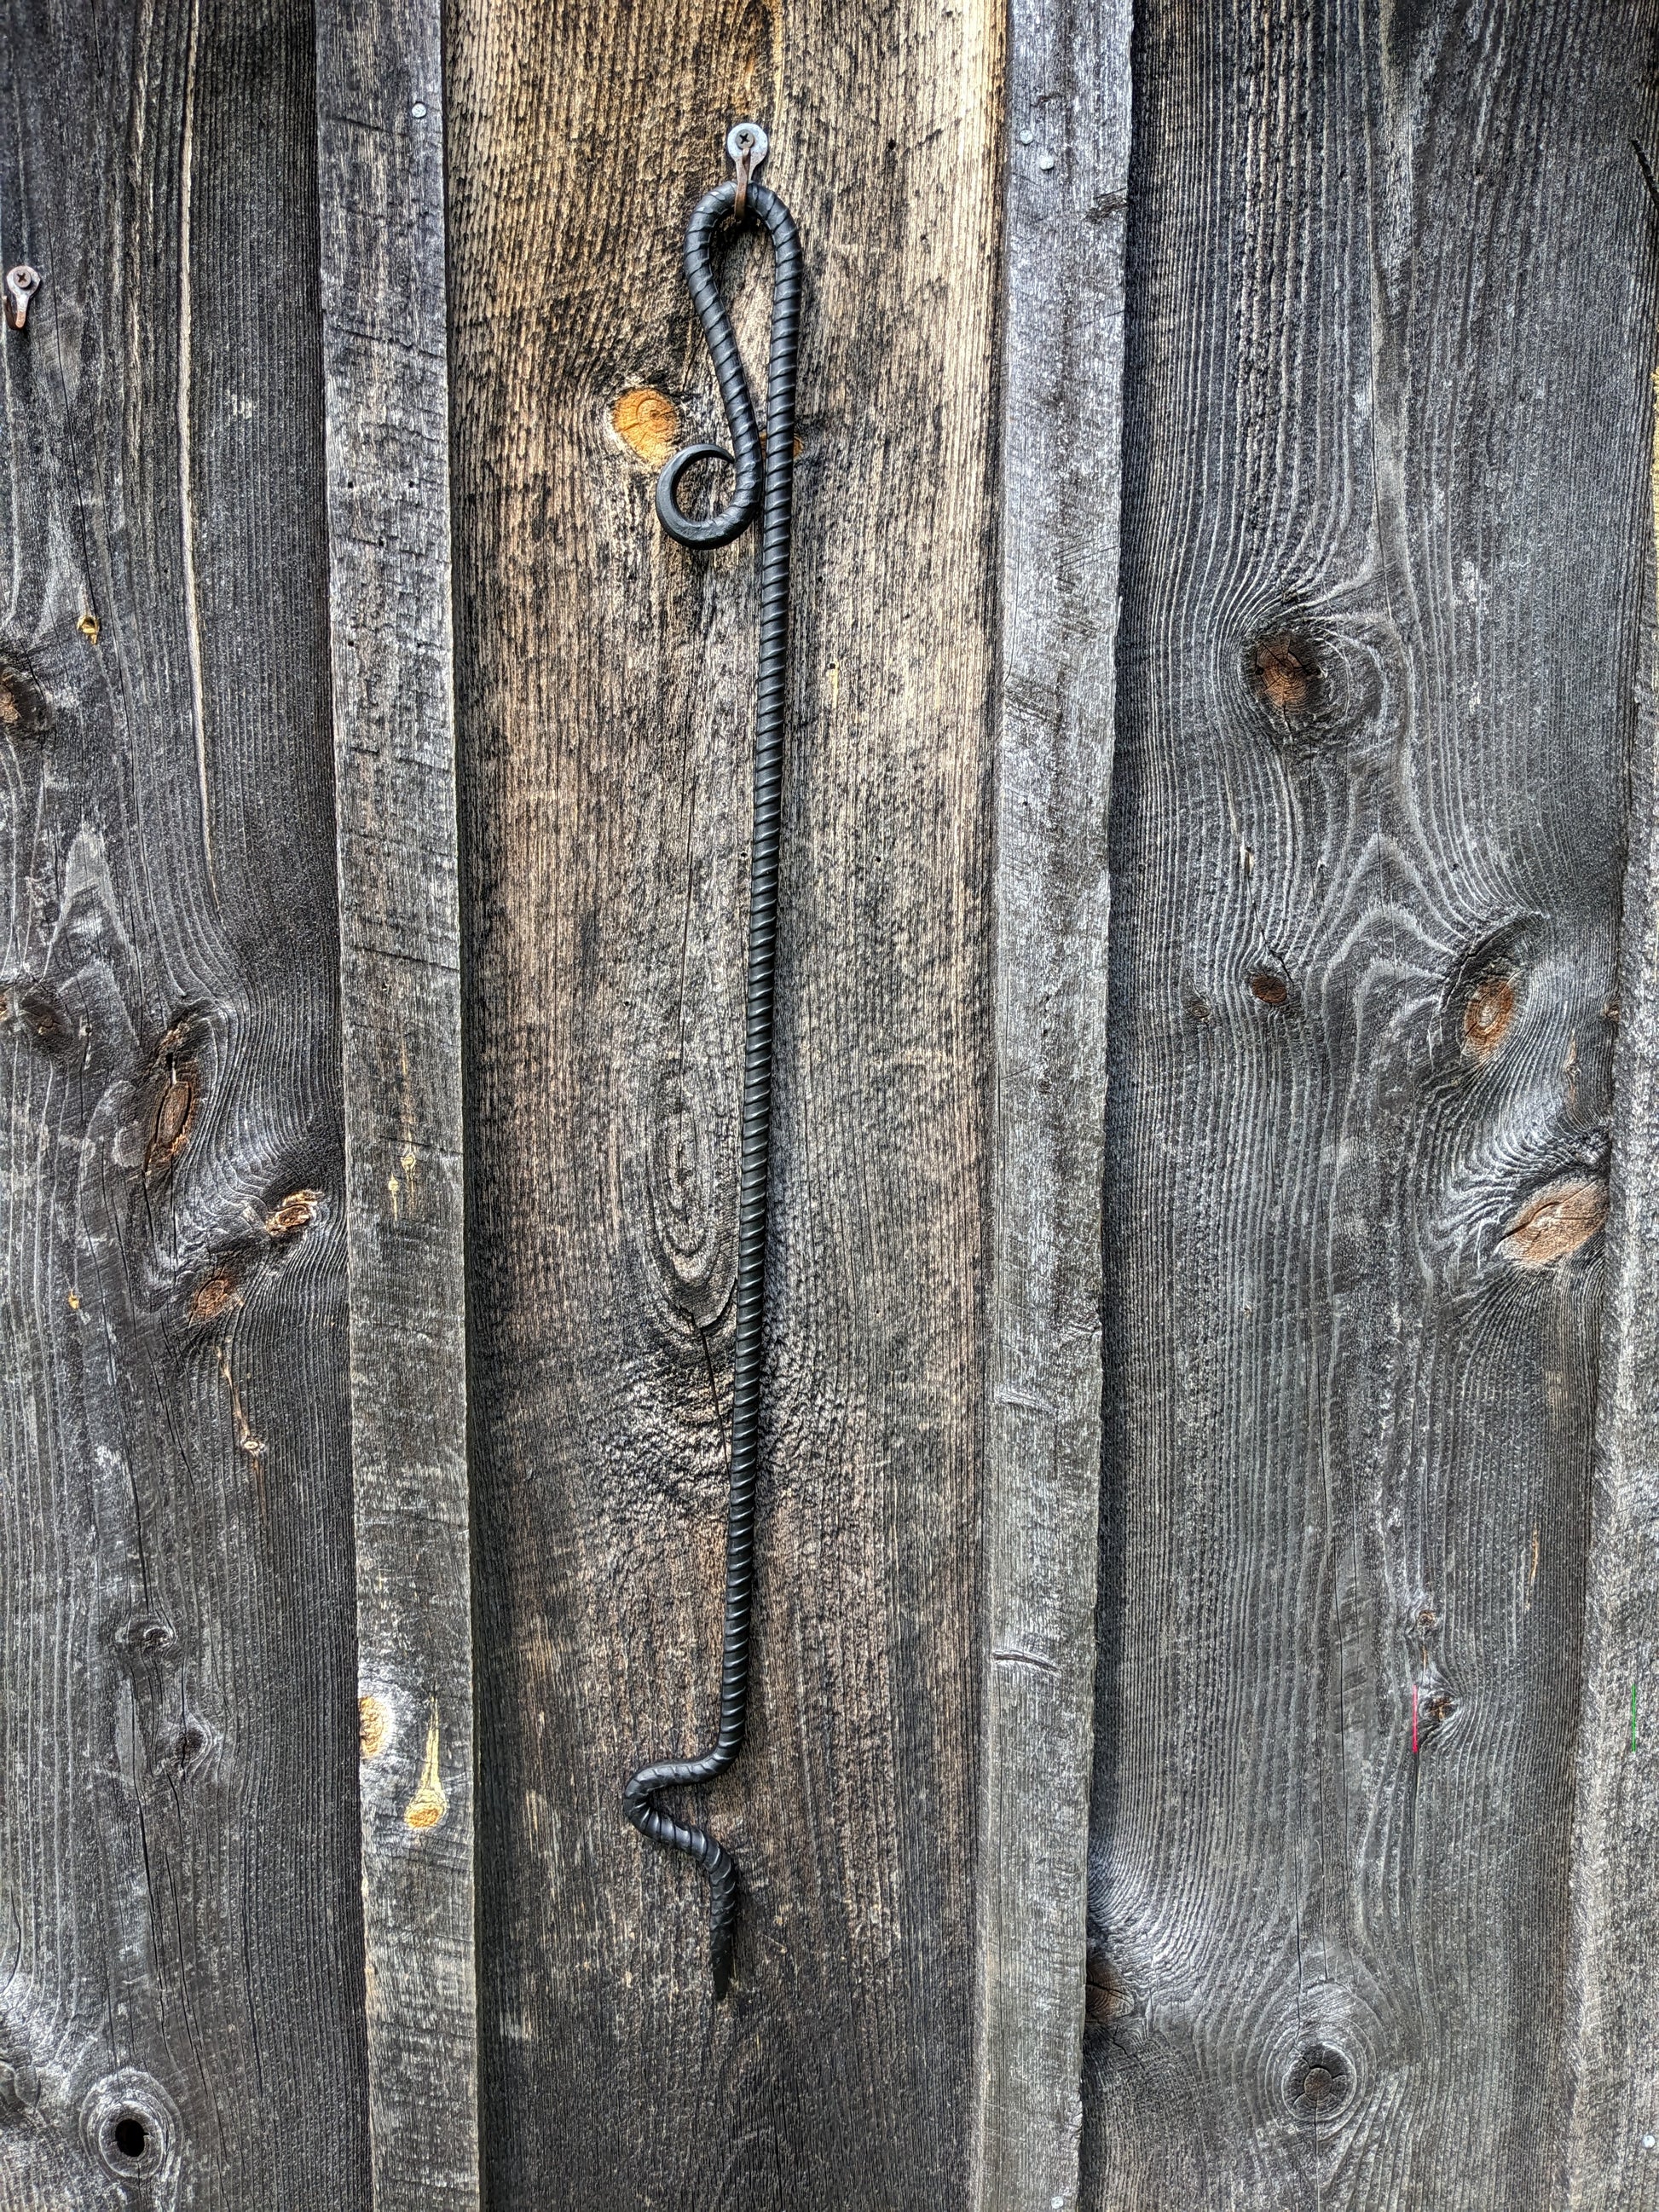 Fire poker made from a single piece of rebar with a scroll handle and curved end for moving wood in your fire.  Shown hung on a barn wood wall.